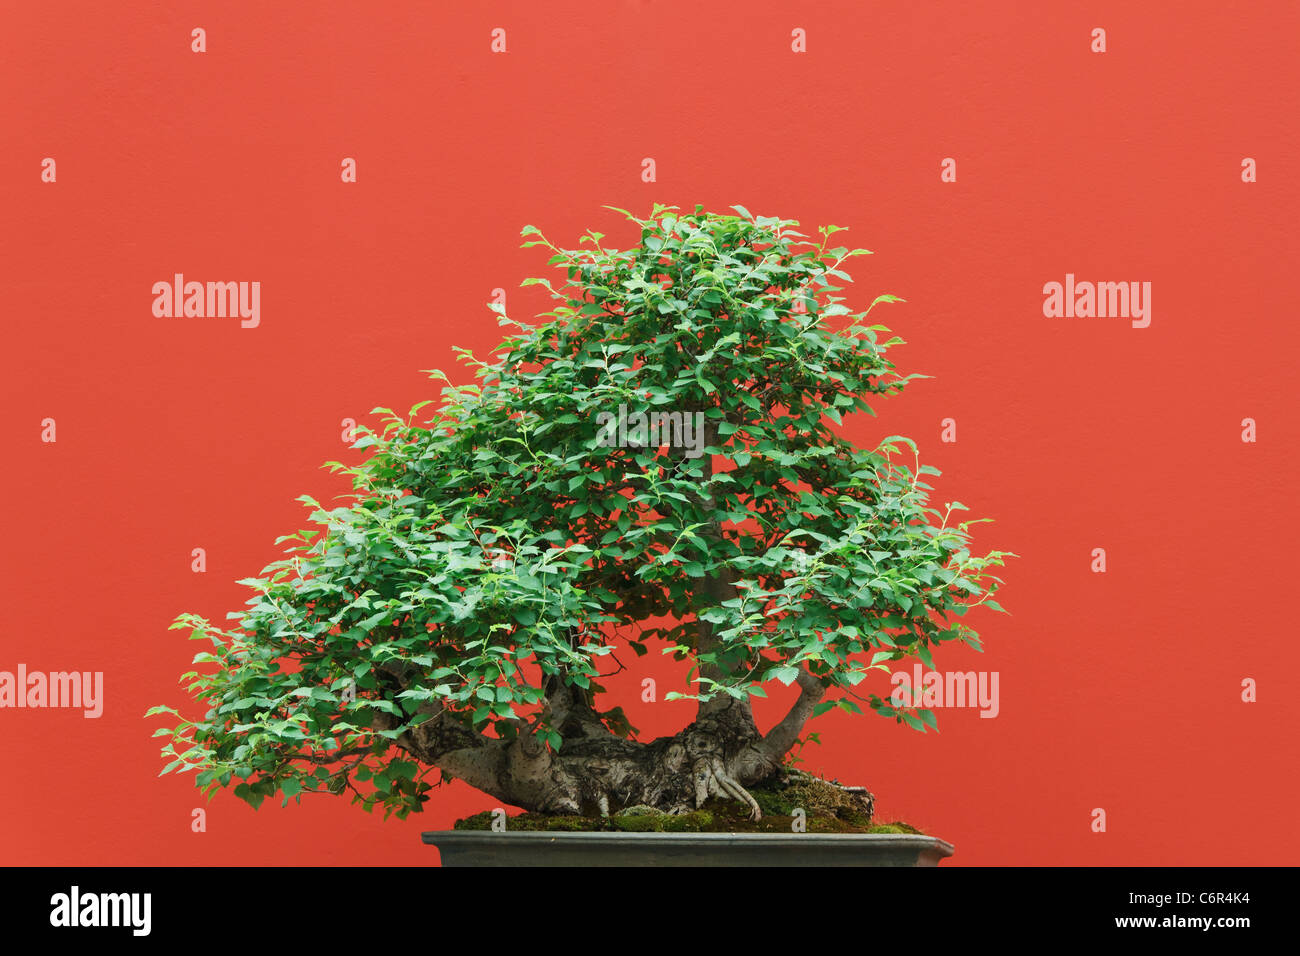 high quality Zelkova bonsai over red background Stock Photo